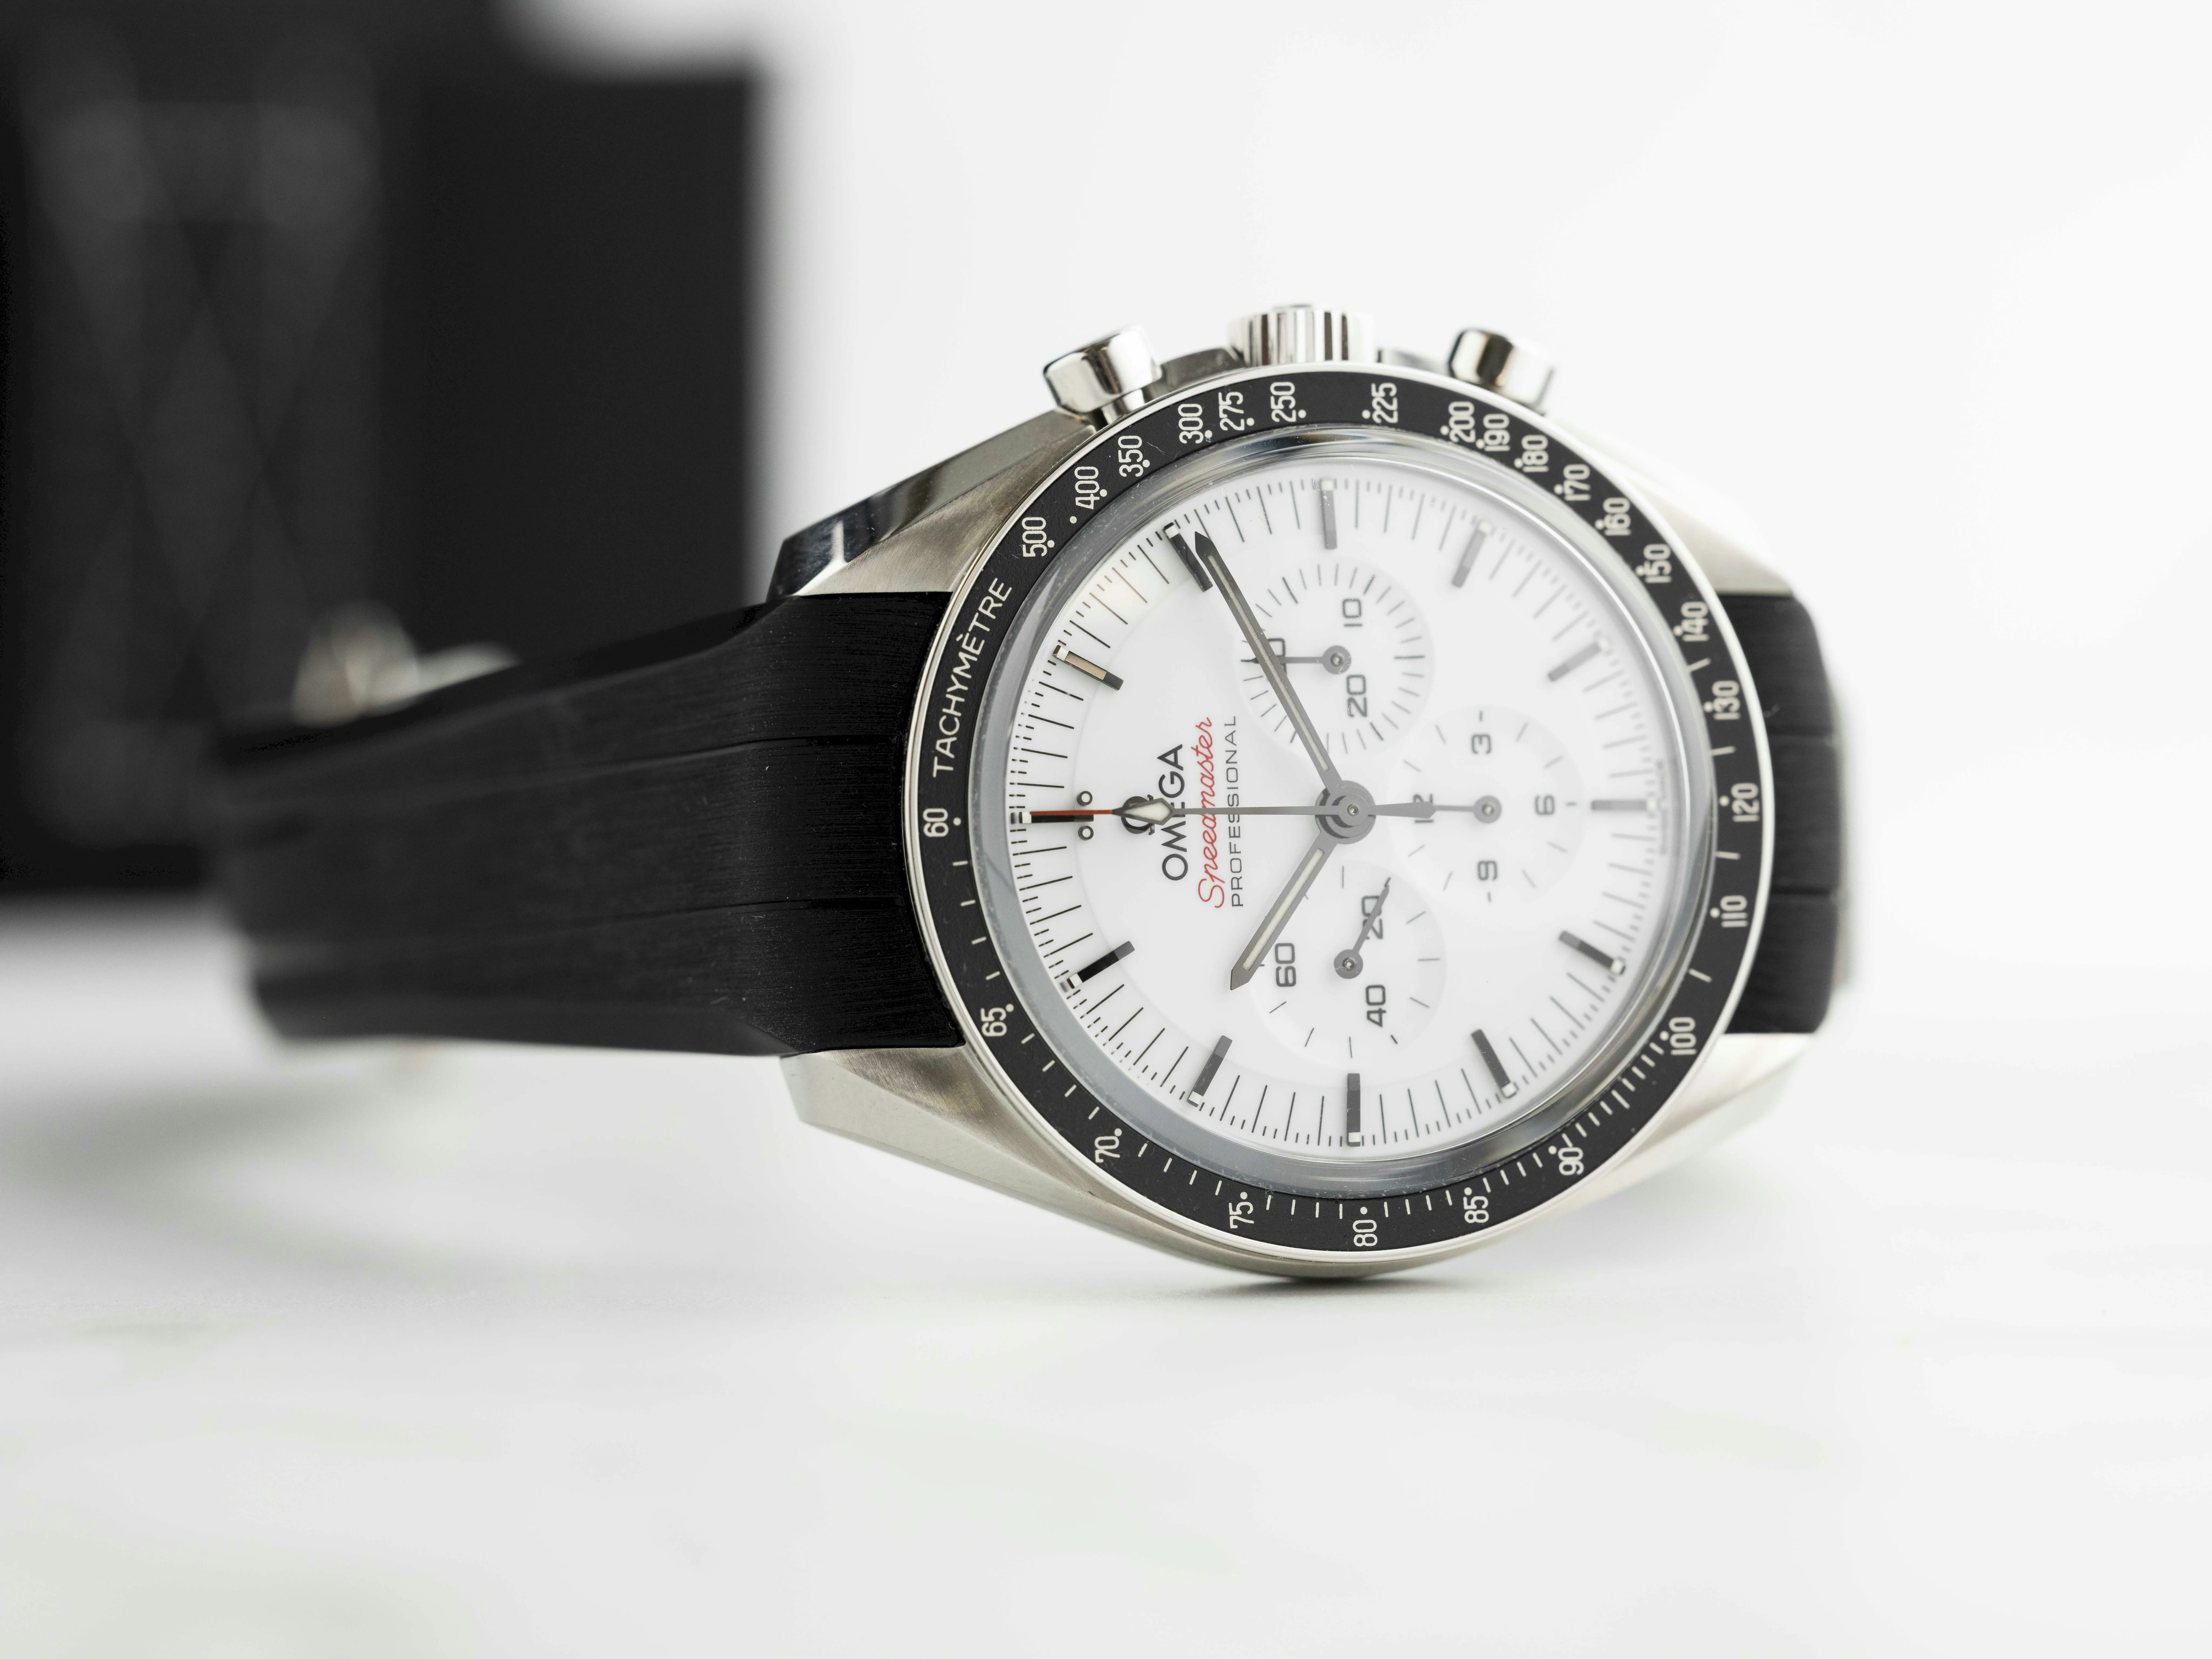 Omega Speedmaster Professional Moonwatch 310.32.42.50.04.001 42mm Stainless steel White